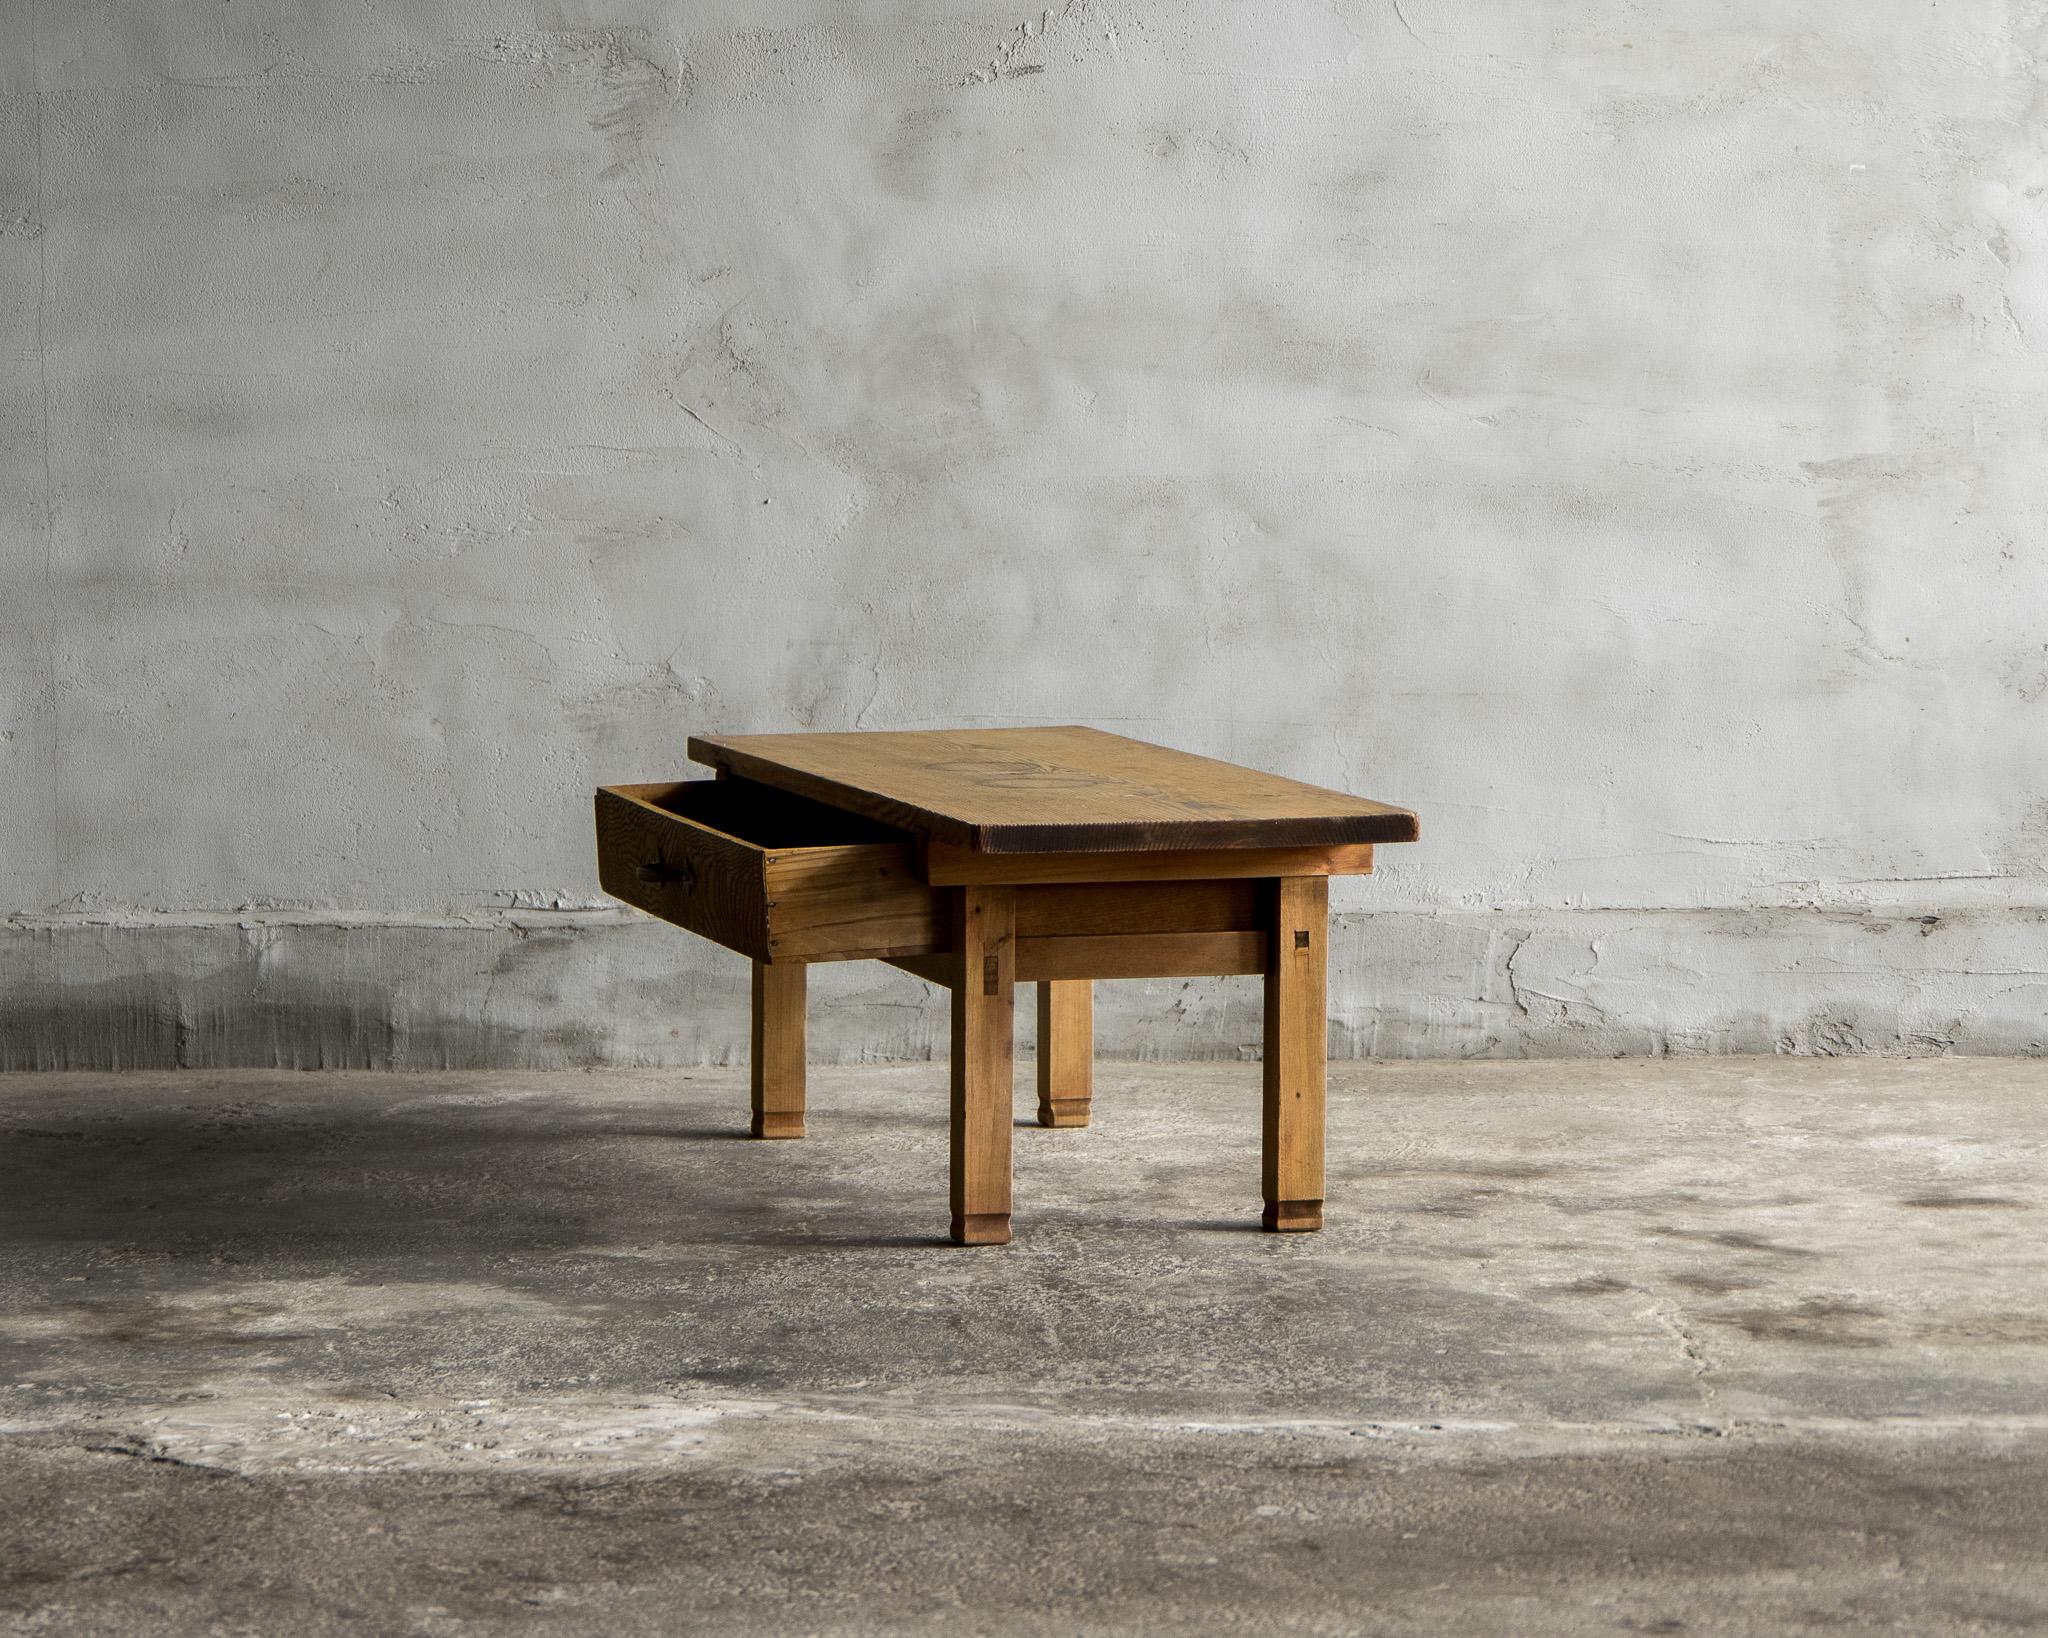 20th Century Japanese Antique, Small low table, Taisho Period'Early 1900s', Wabi Sabi